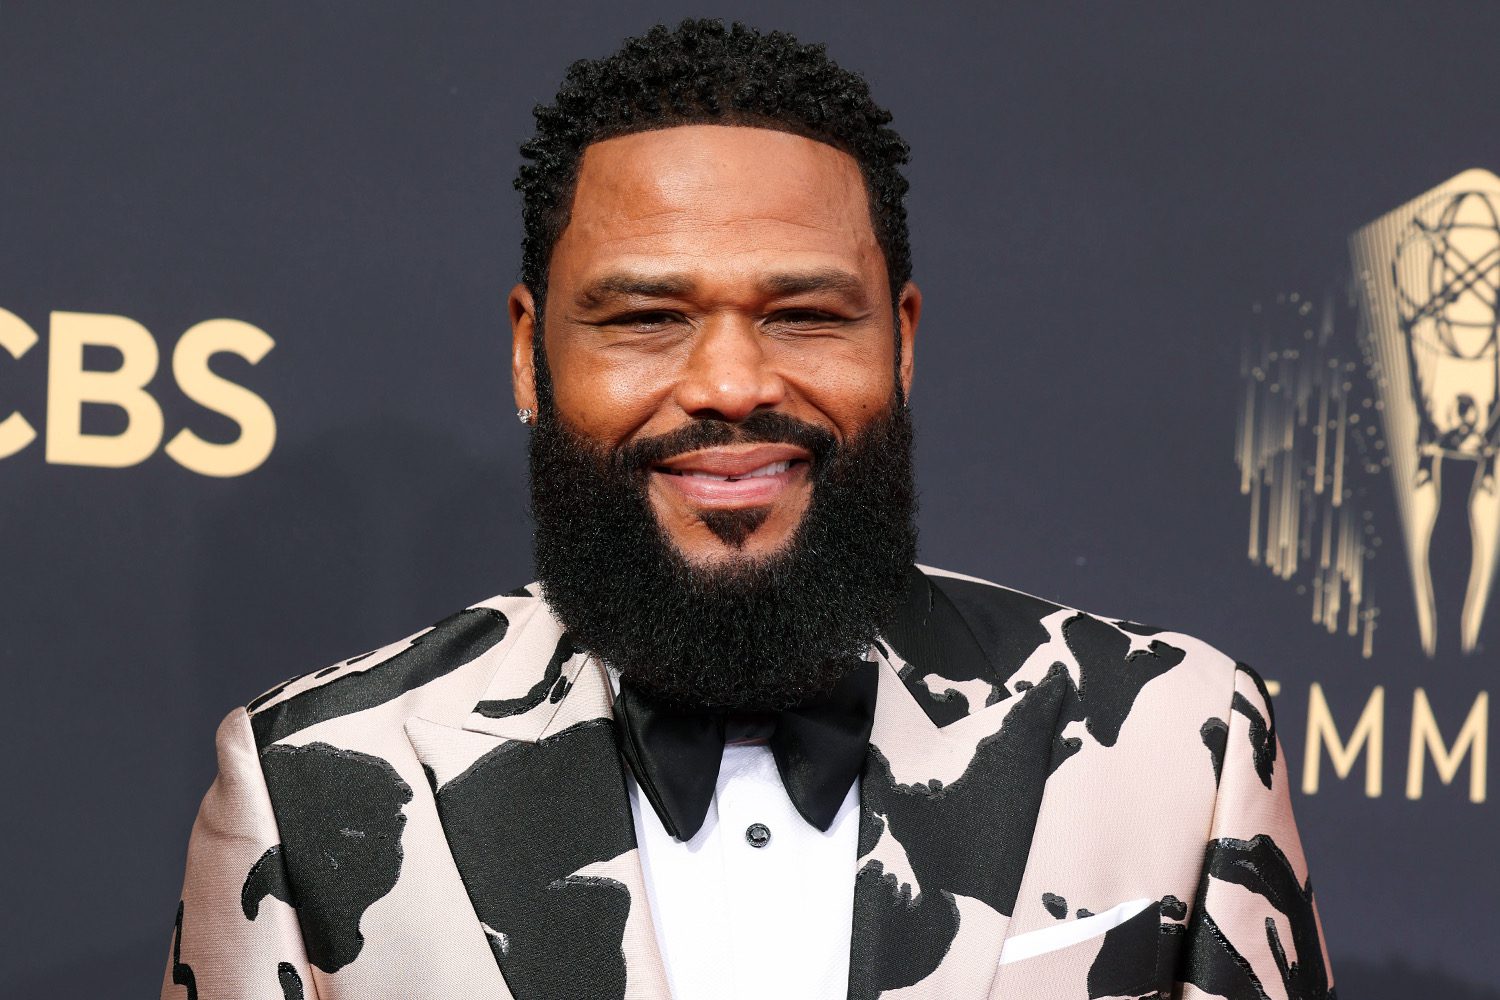 Anthony Anderson’s net worth